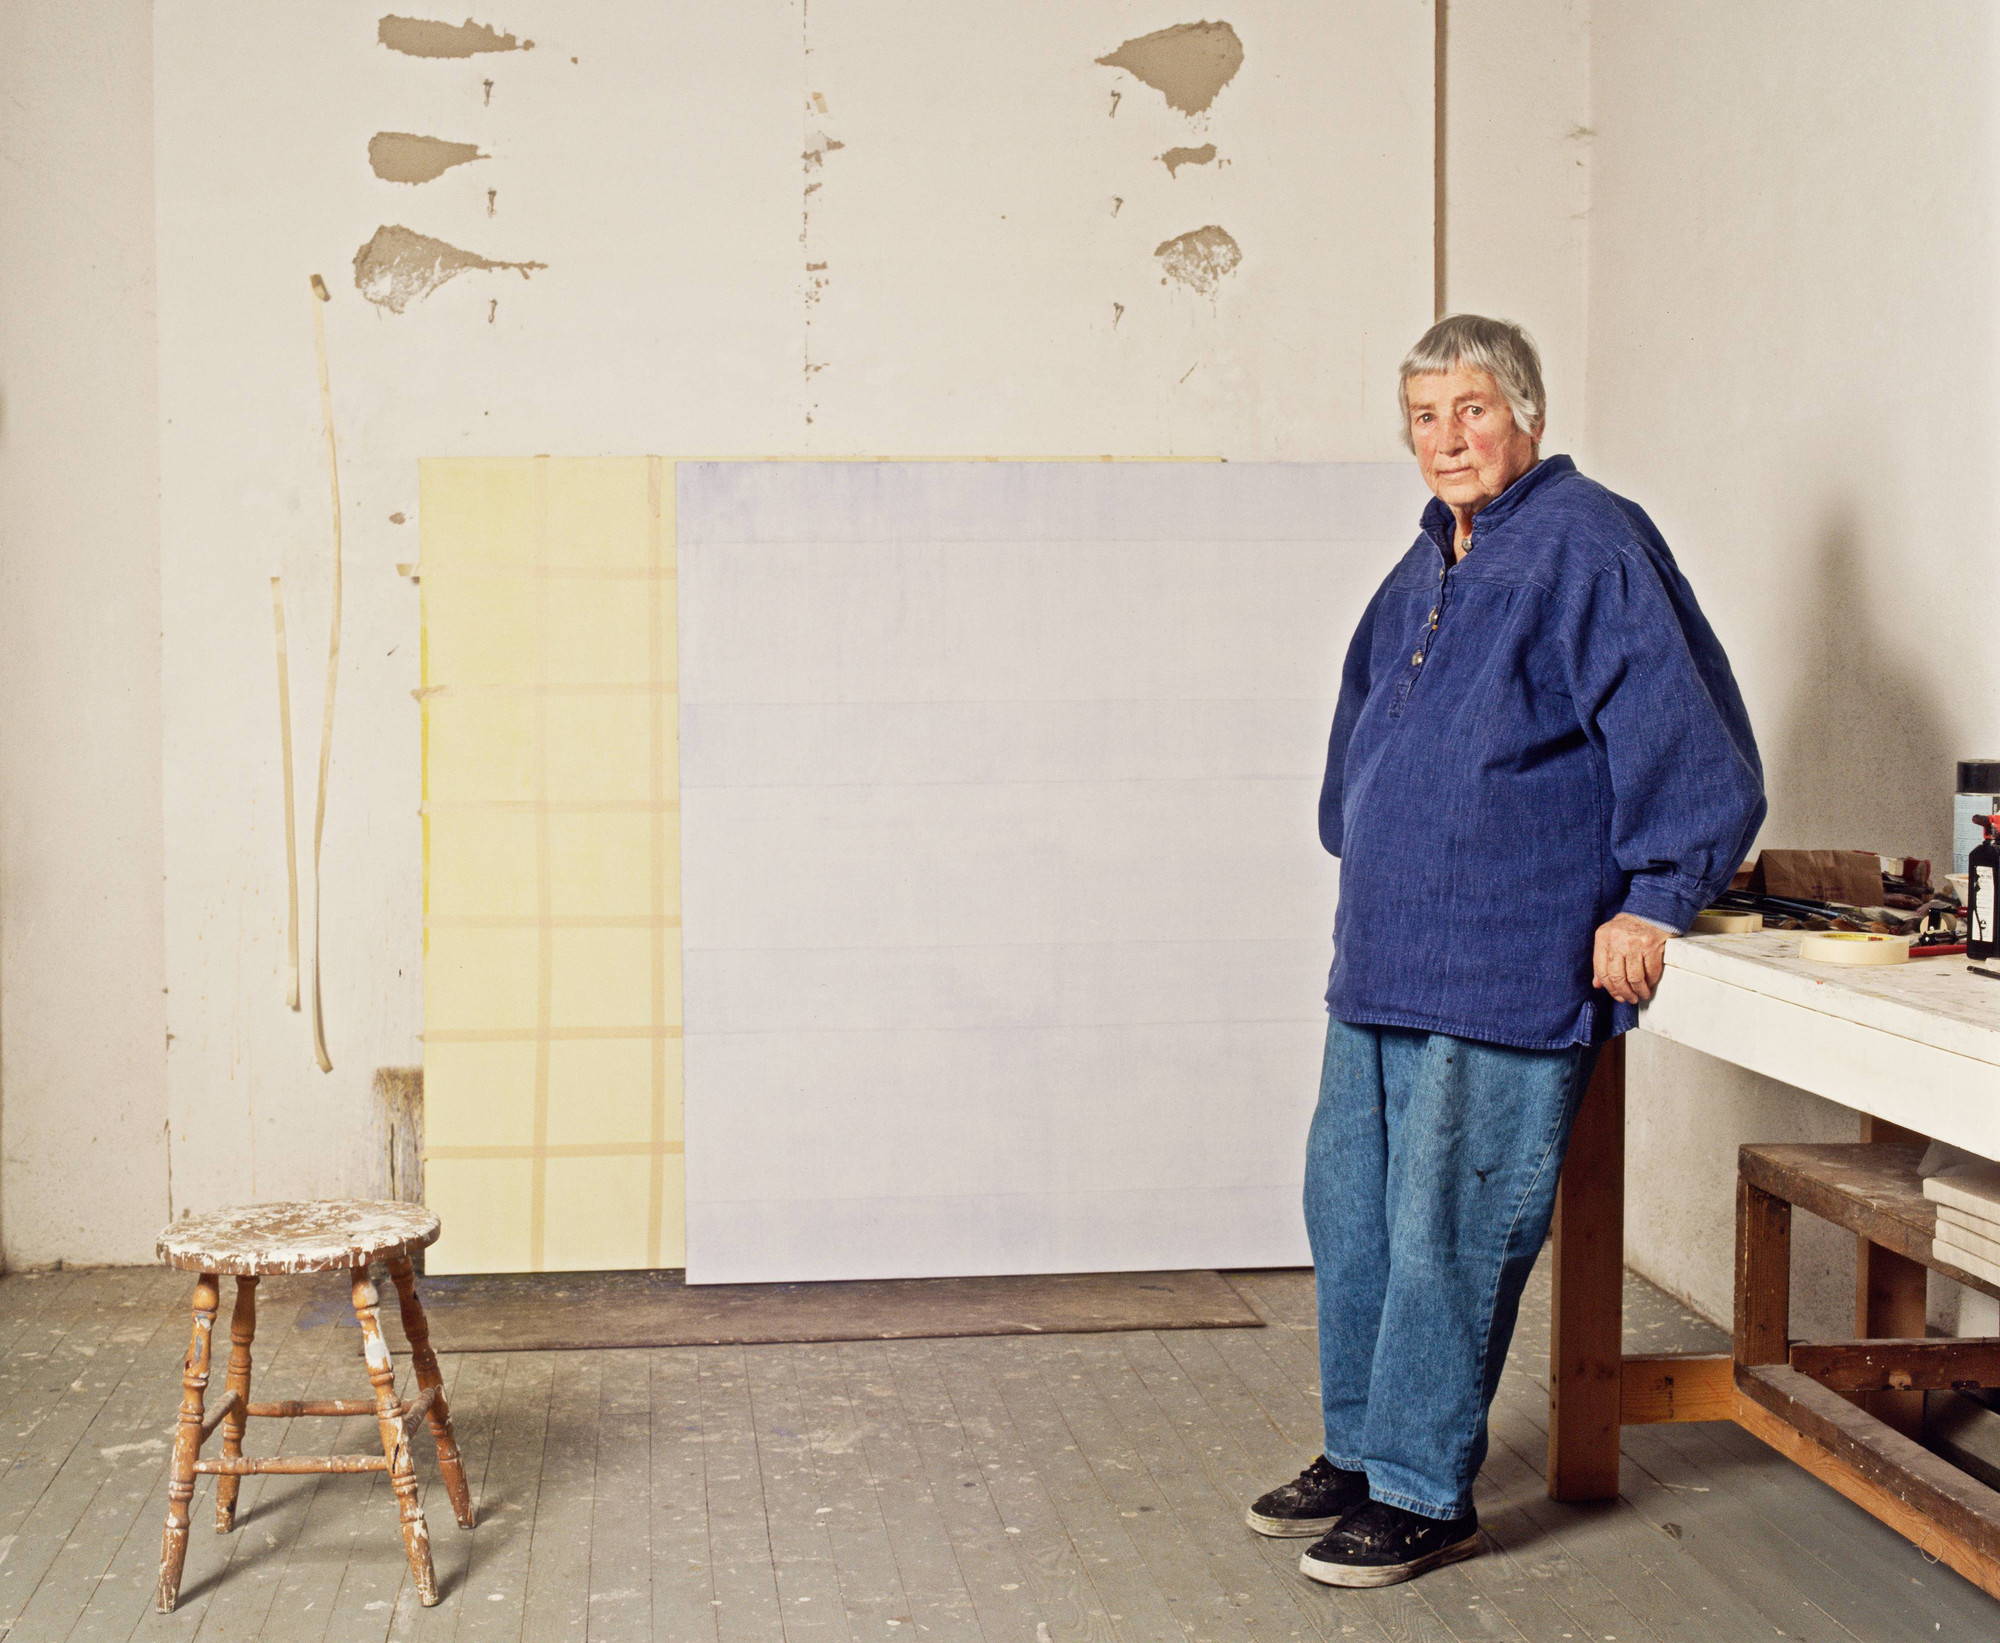 Agnes Martin in her studio in 2004. Photograph by Michele Mattei